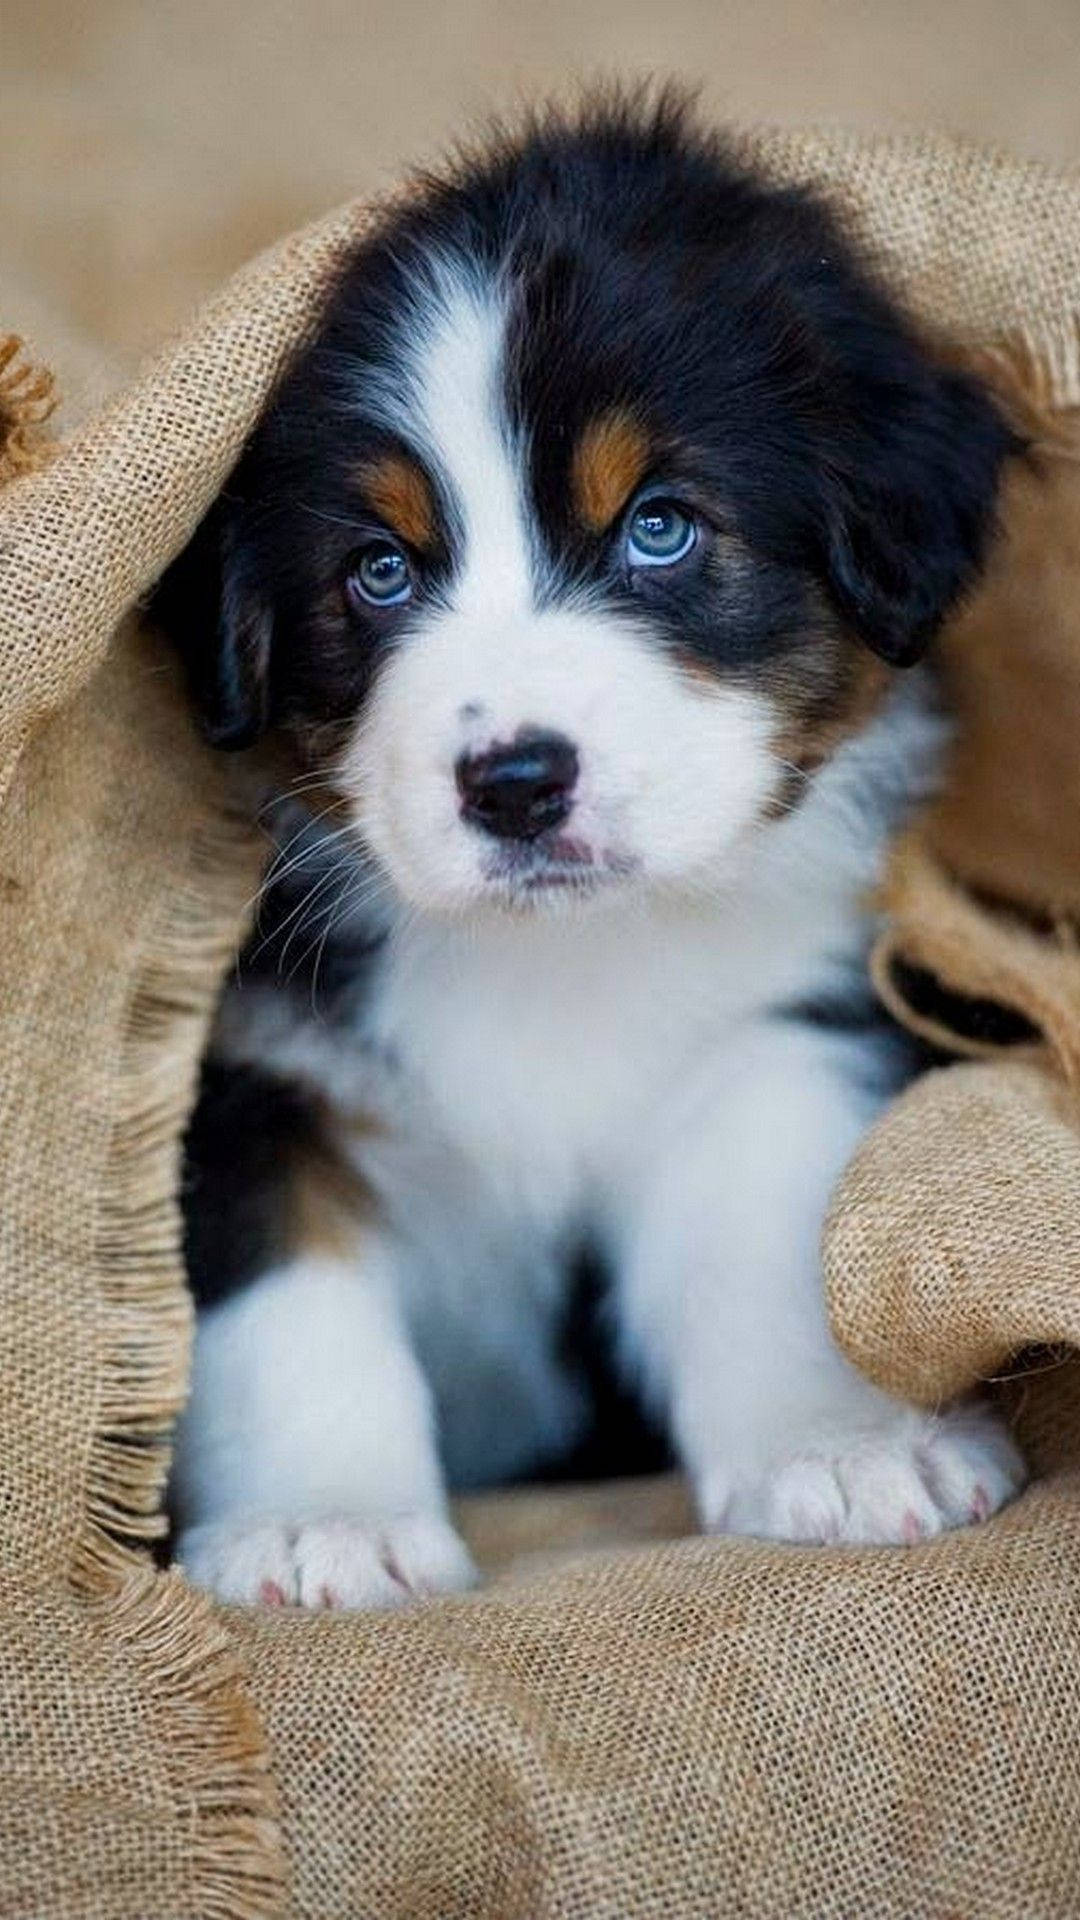 Puppy Under The Picnic Mat Background